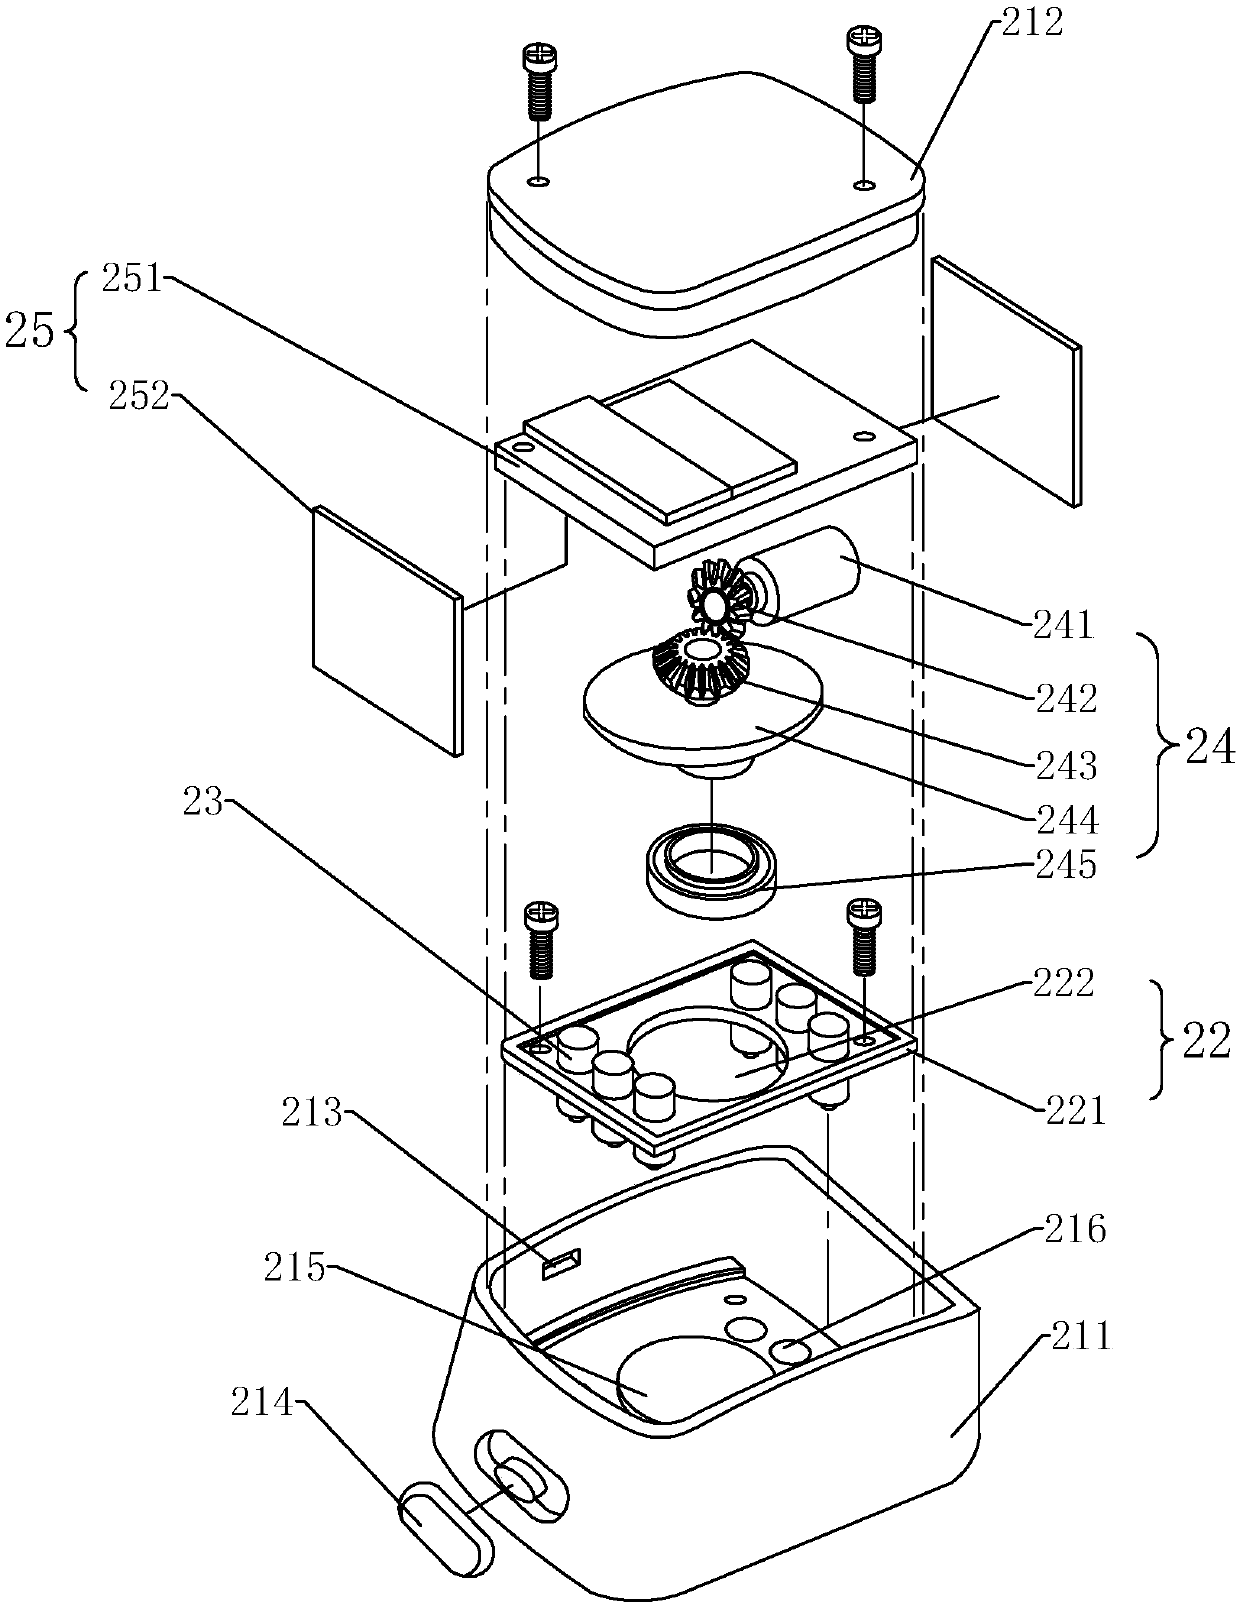 Medical intravenous injection auxiliary device